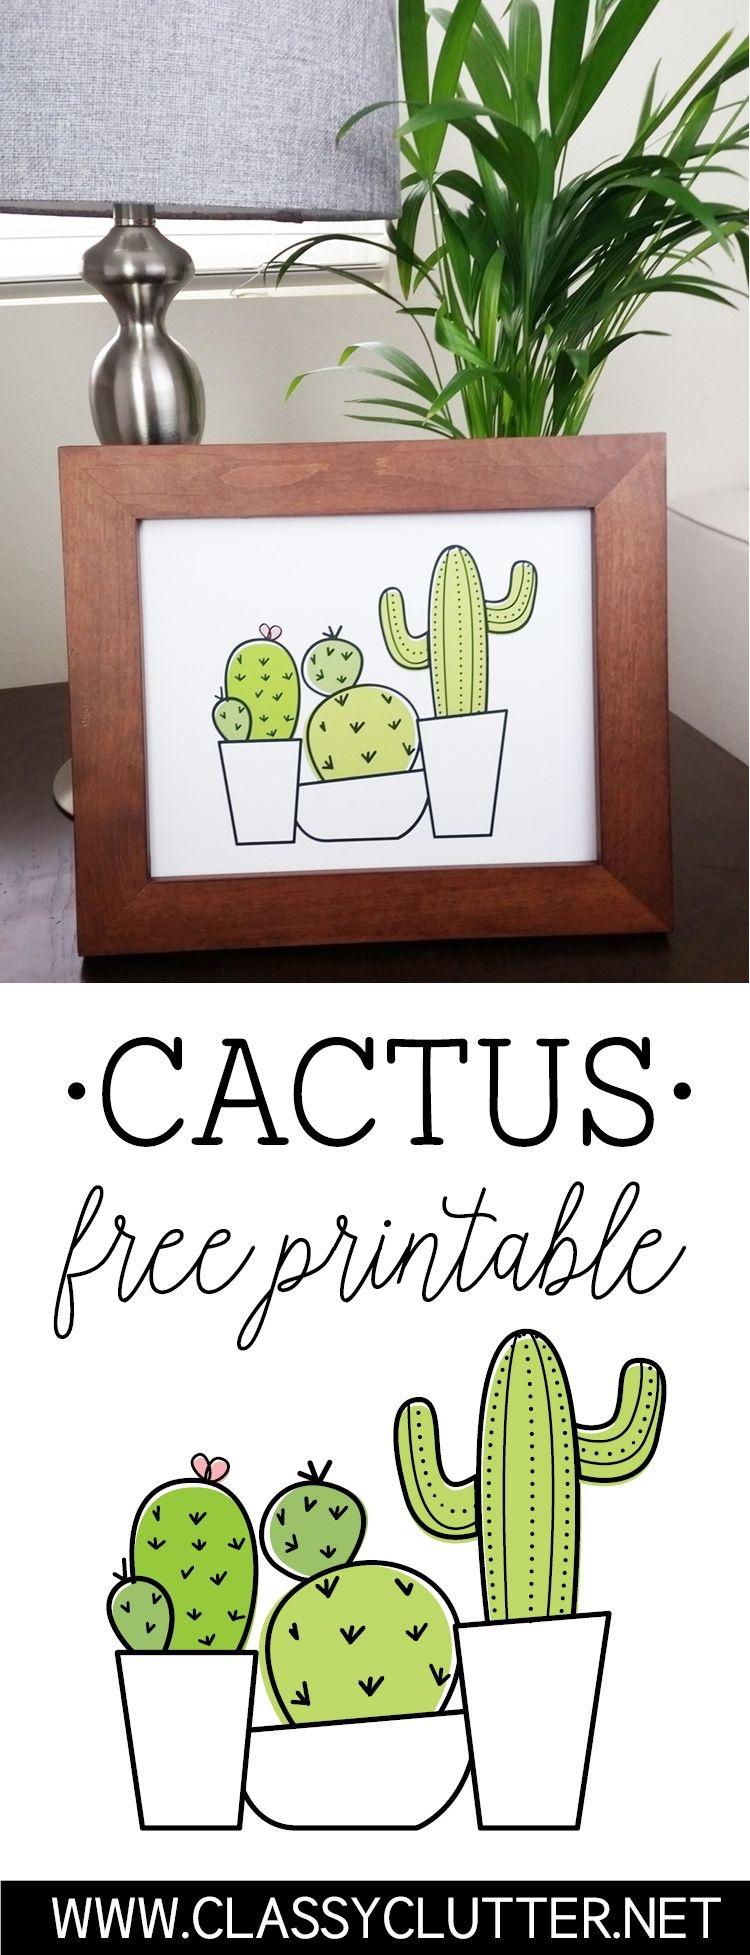 Free Cactus Printable | Classy Clutter Blog | Cactus Art, Cactus - Free Printable Cactus